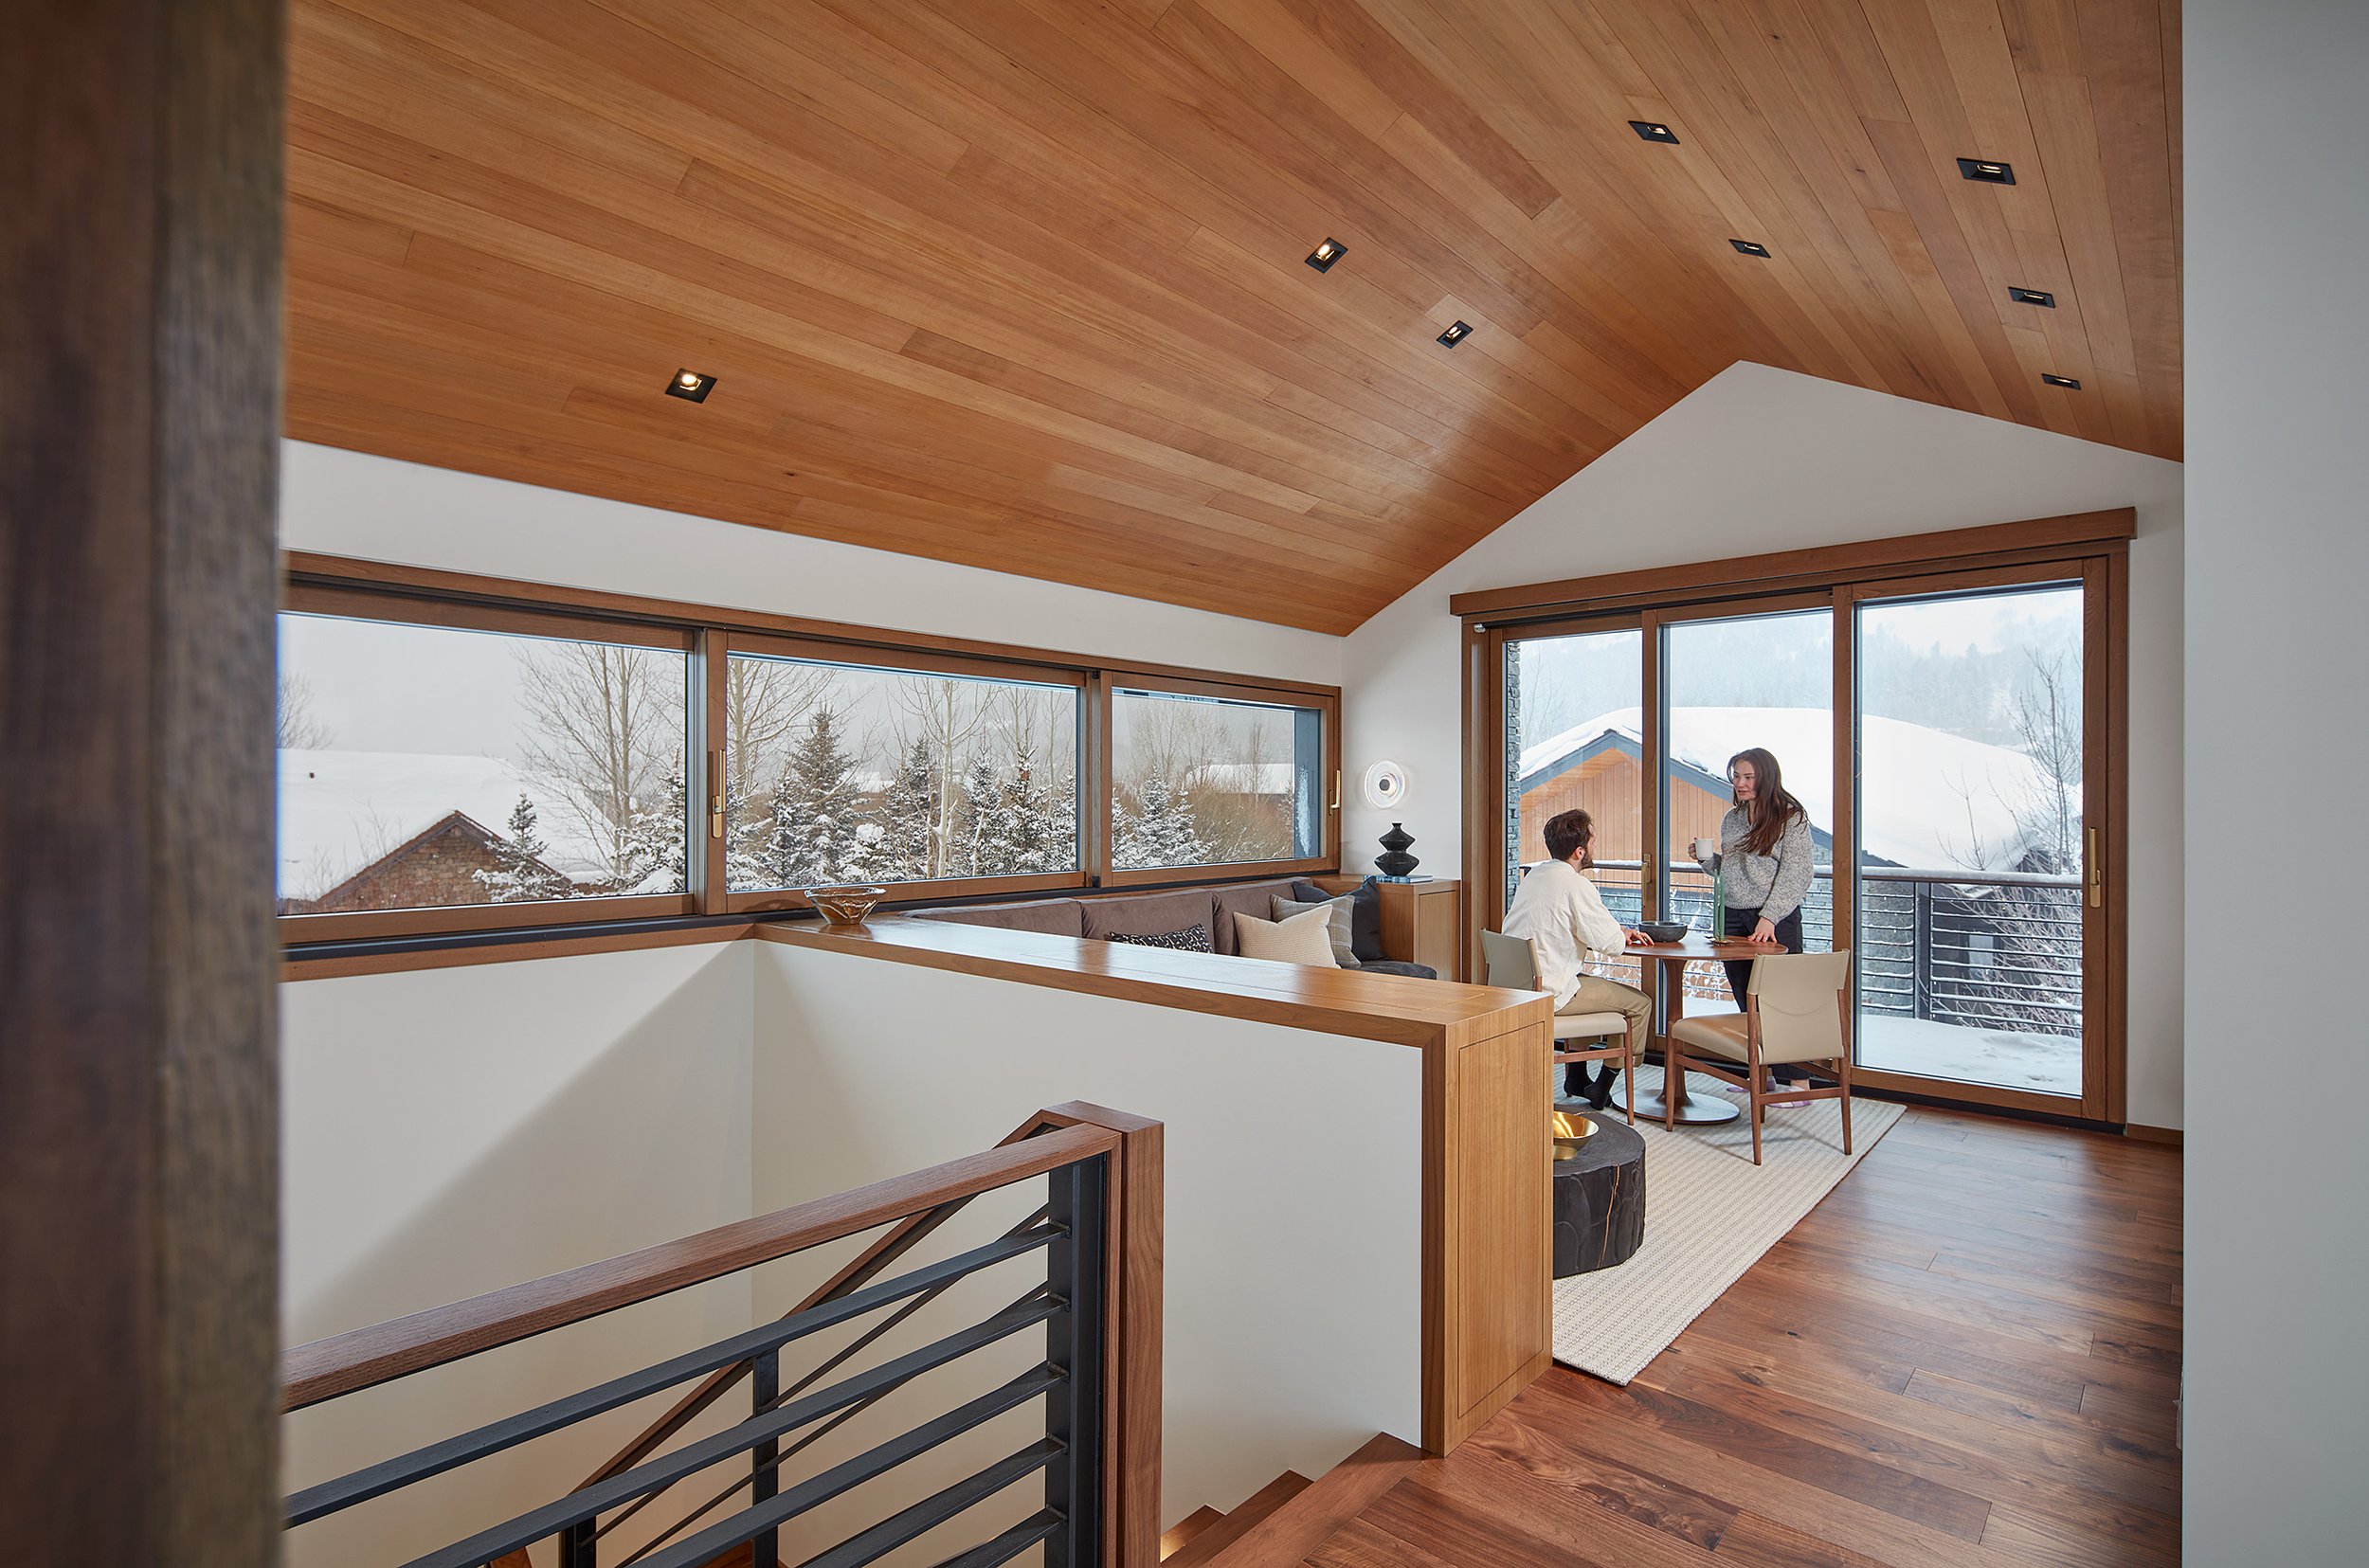 Living room and dining of a snug guest house in Teton Village